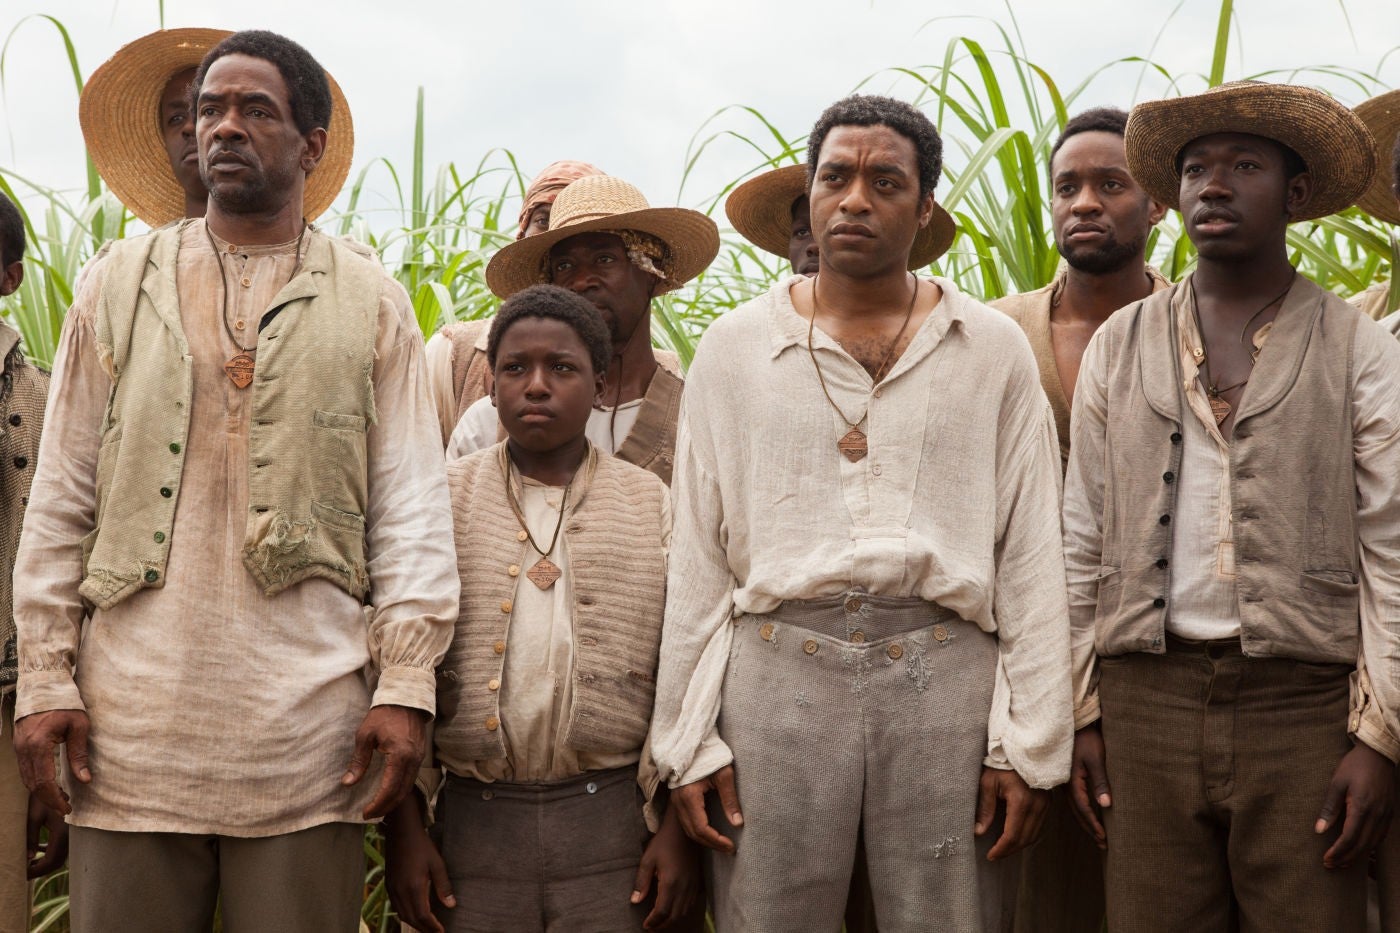 Chiwetel Ejiofor stars as kidnapped slave Solomon Northup in 12 Years A Slave, the bookmakers' favourite for Best Actor